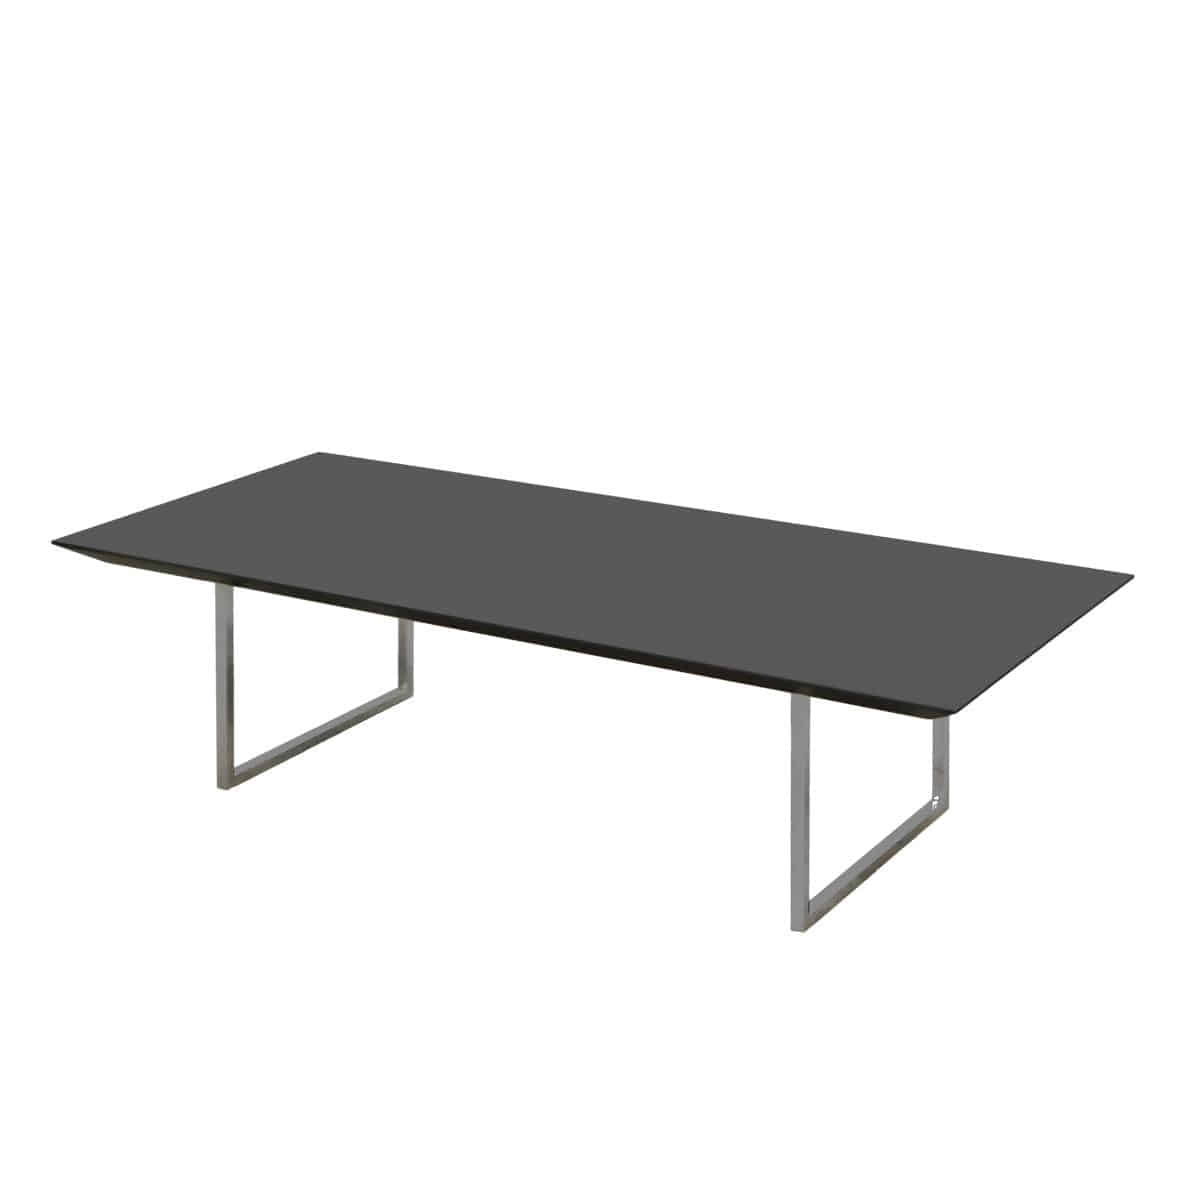 Zacc collection by SEDECRM  Coffee Table  알엠 커피 테이블